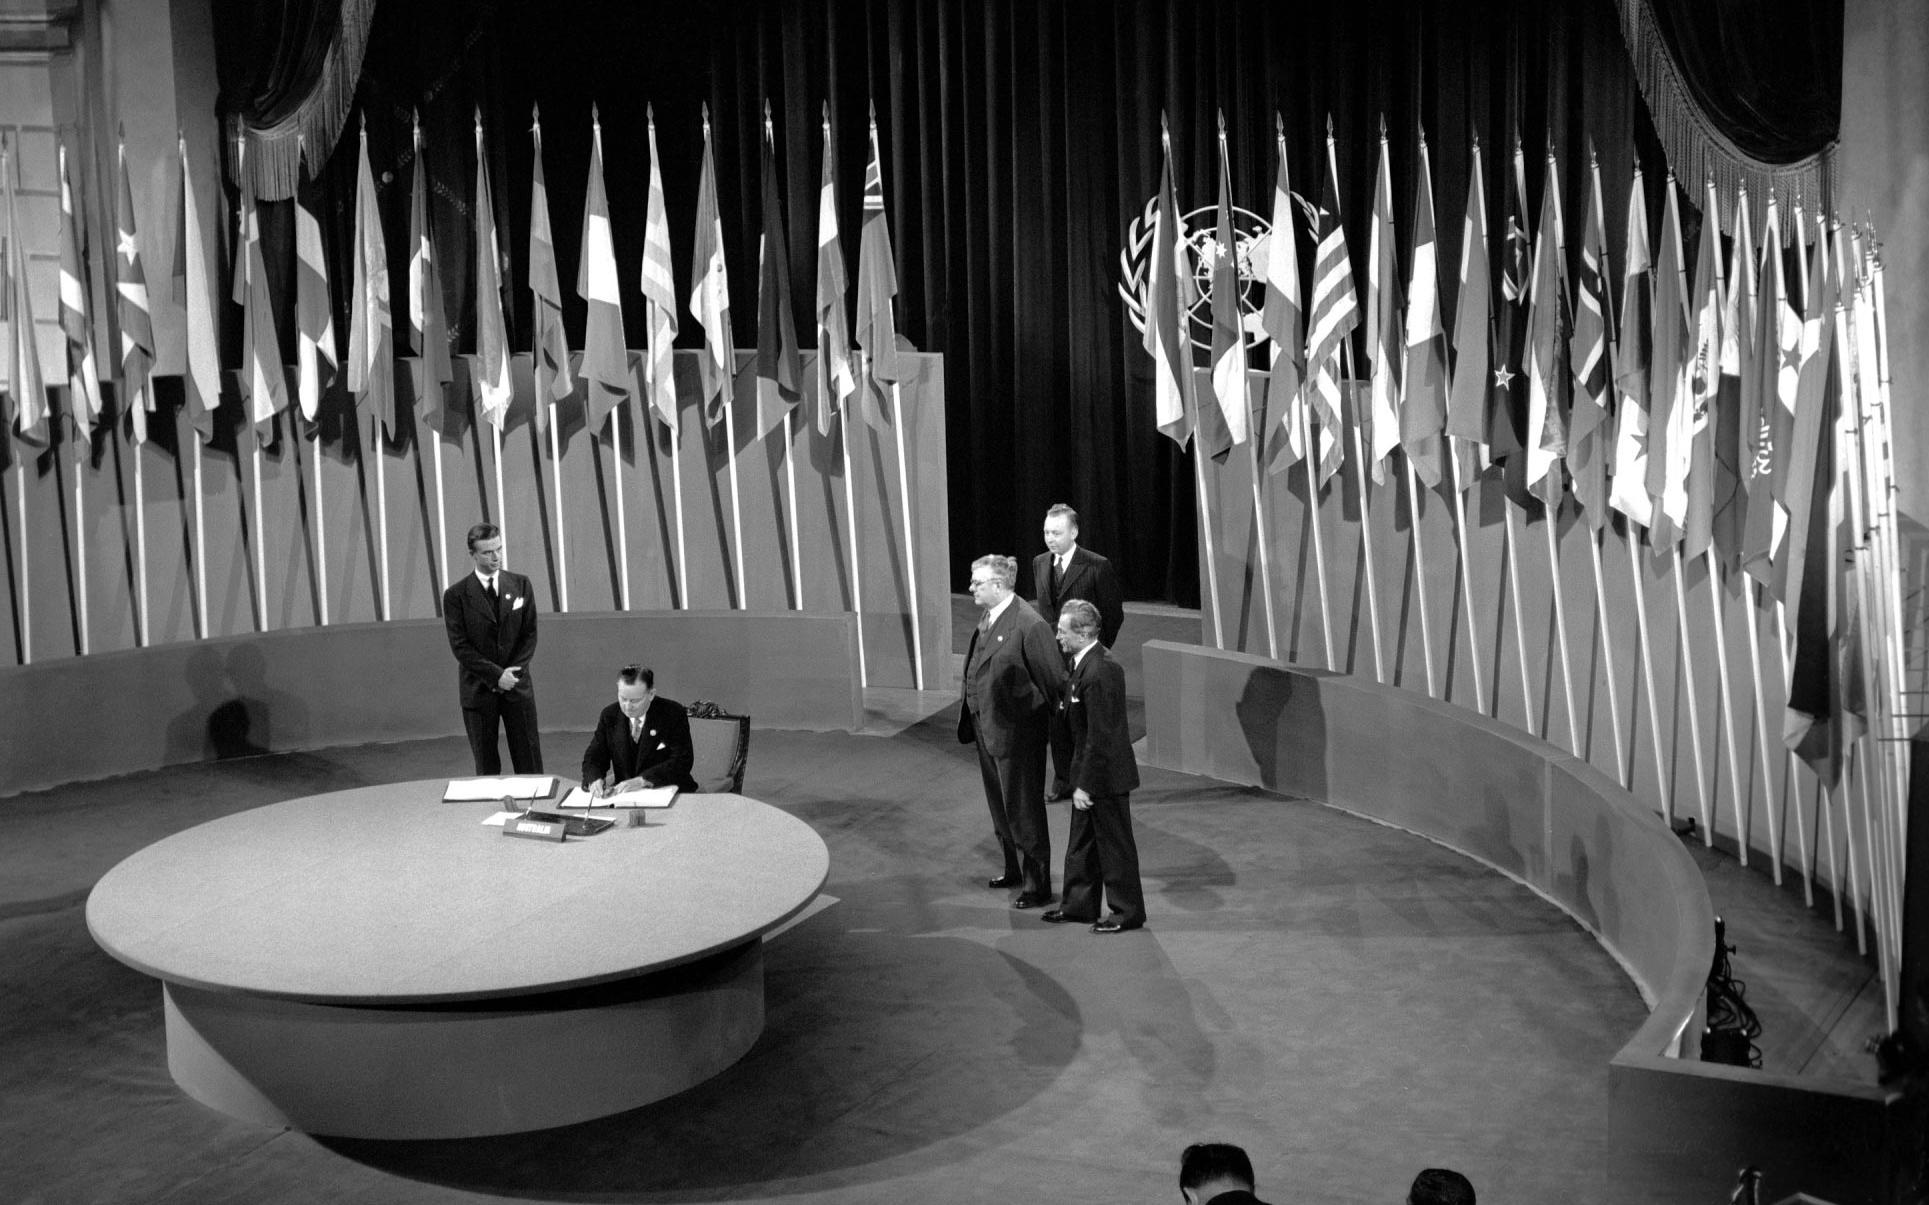 Francis Michael Forde, then Australia’s Deputy Prime Minister, signing the UN Charter at a ceremony held in San Francisco, 26 June 1945